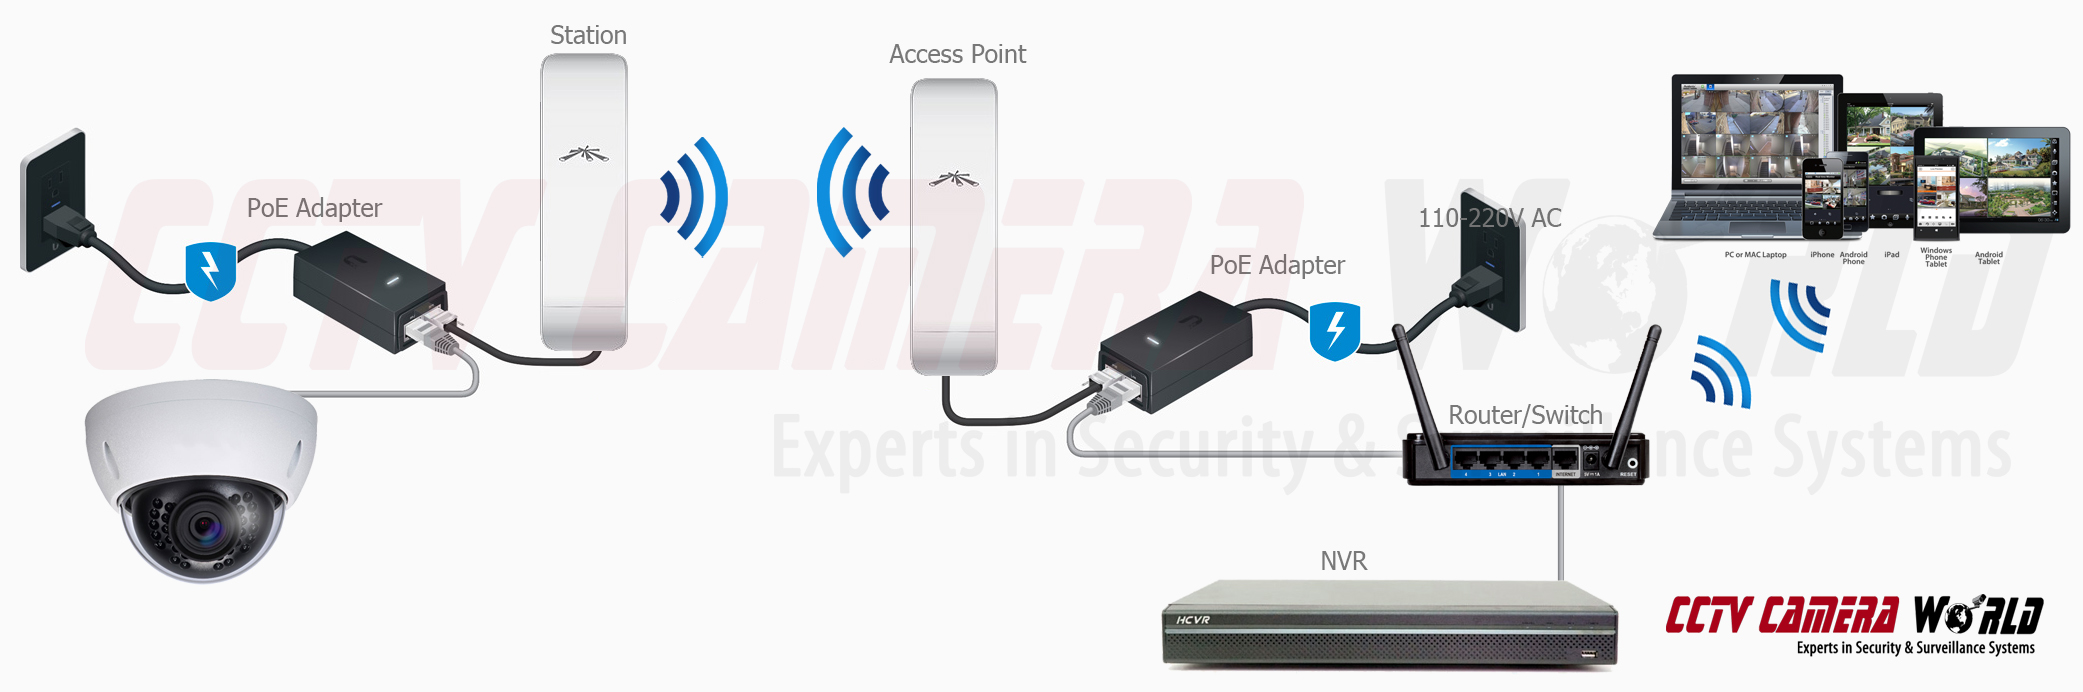 How To Setup a Point To Point Wireless Access Point Link for IP Cameras